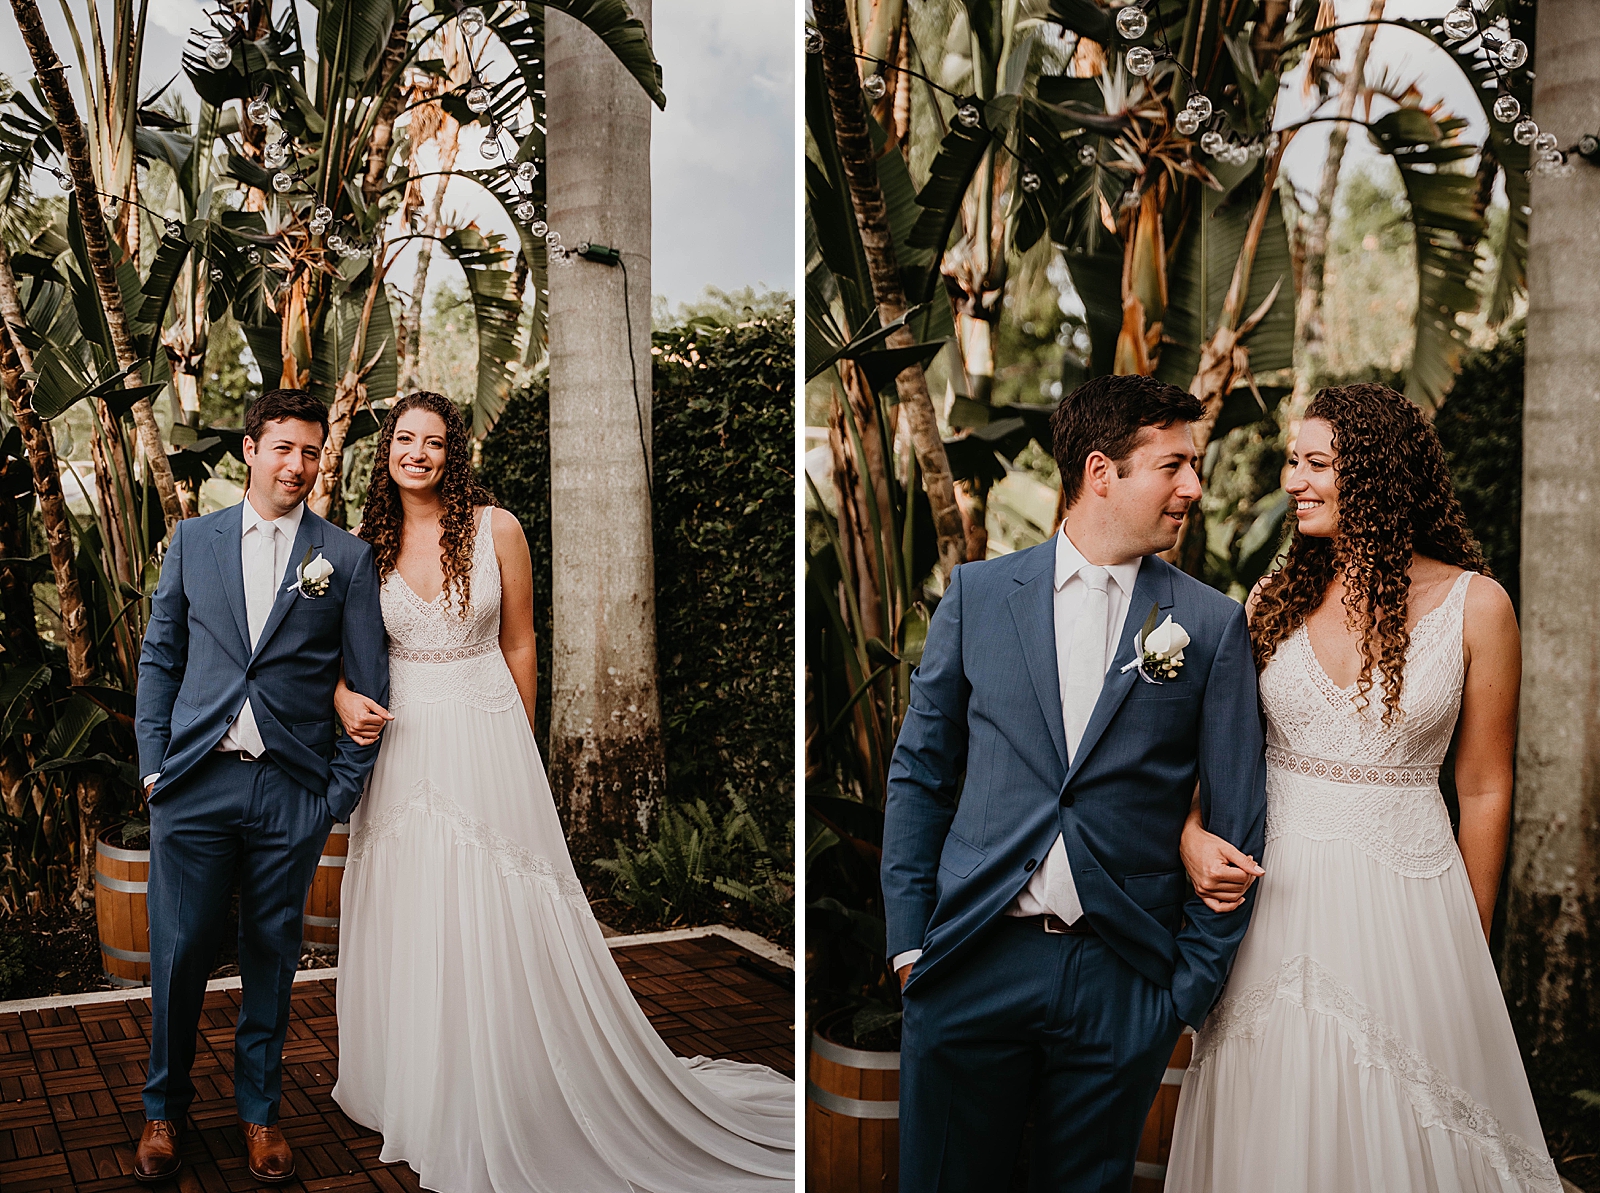 Bride wrapping arm around Groom's arm posing by palm trees Intimate South Florida Wedding Photography captured by South Florida Wedding Photographer Krystal Capone Photography 